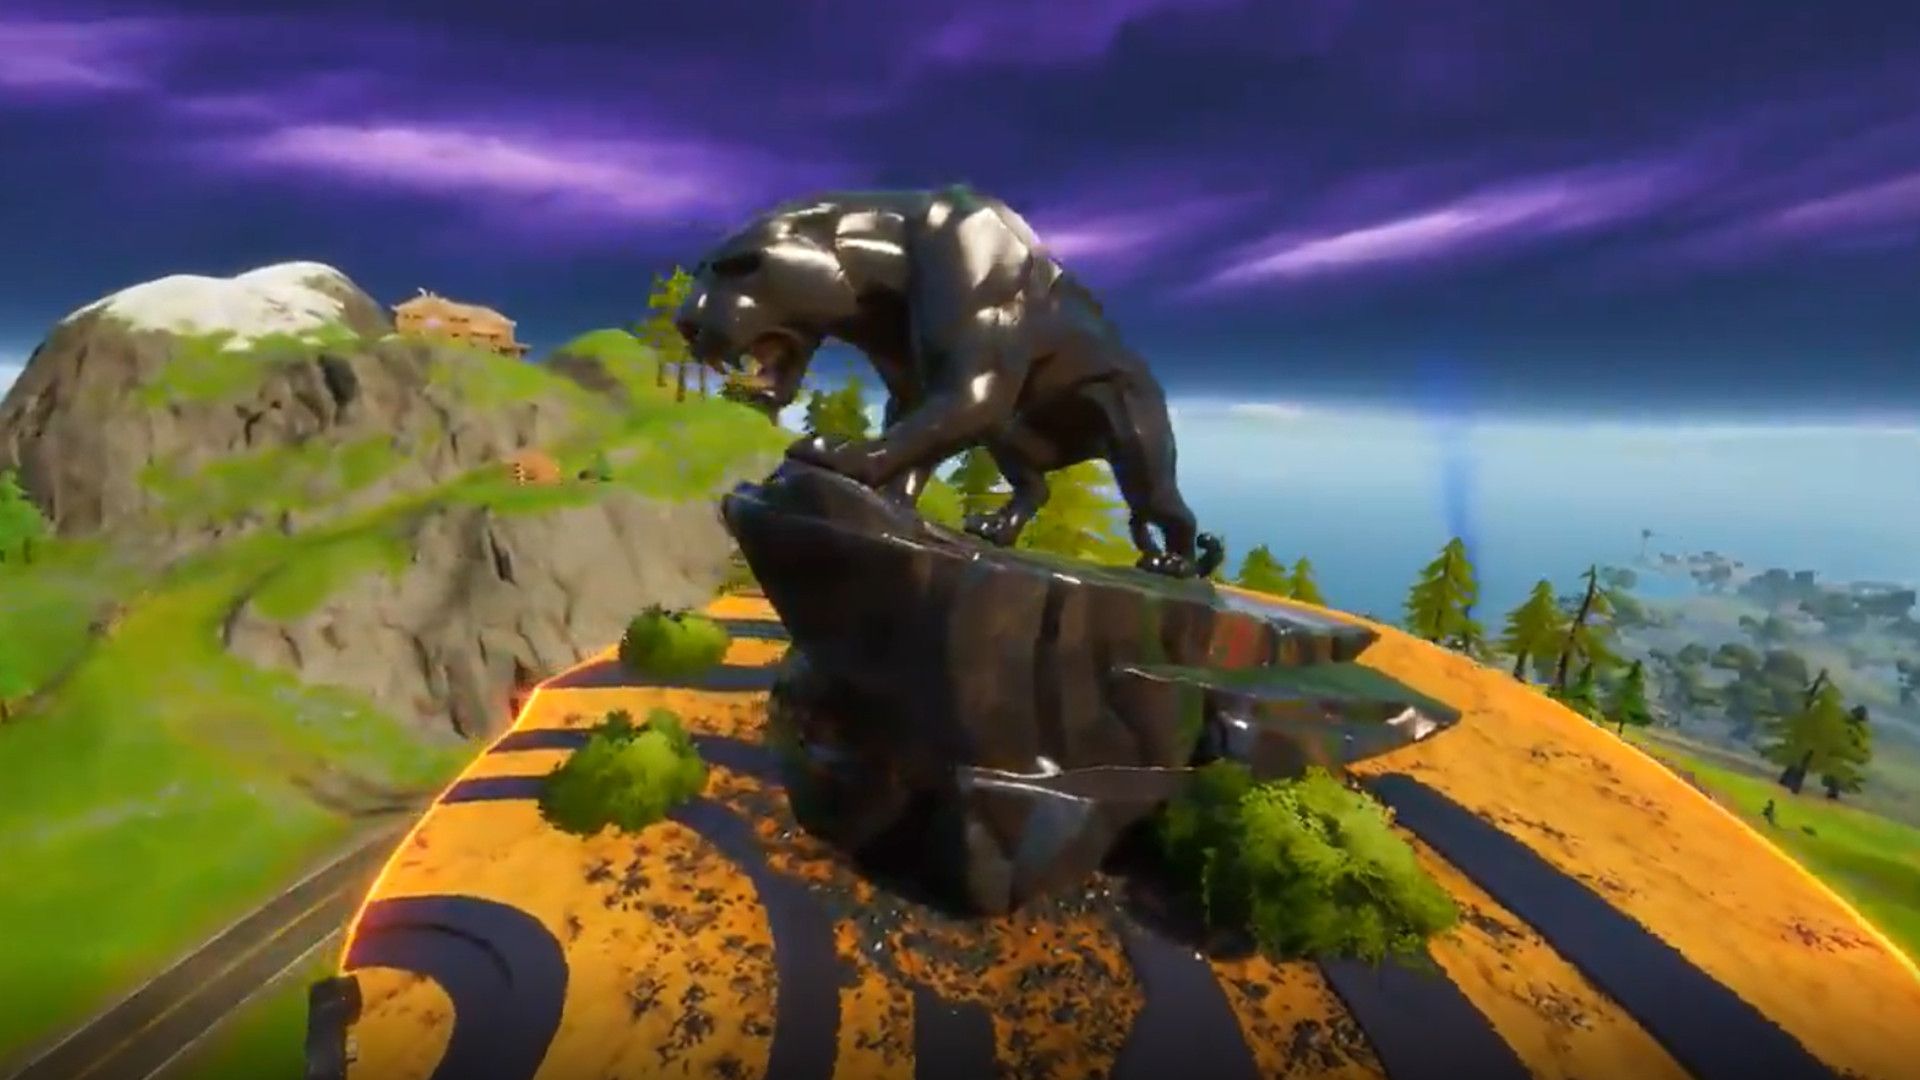 Fortnite now has a Black Panther monument